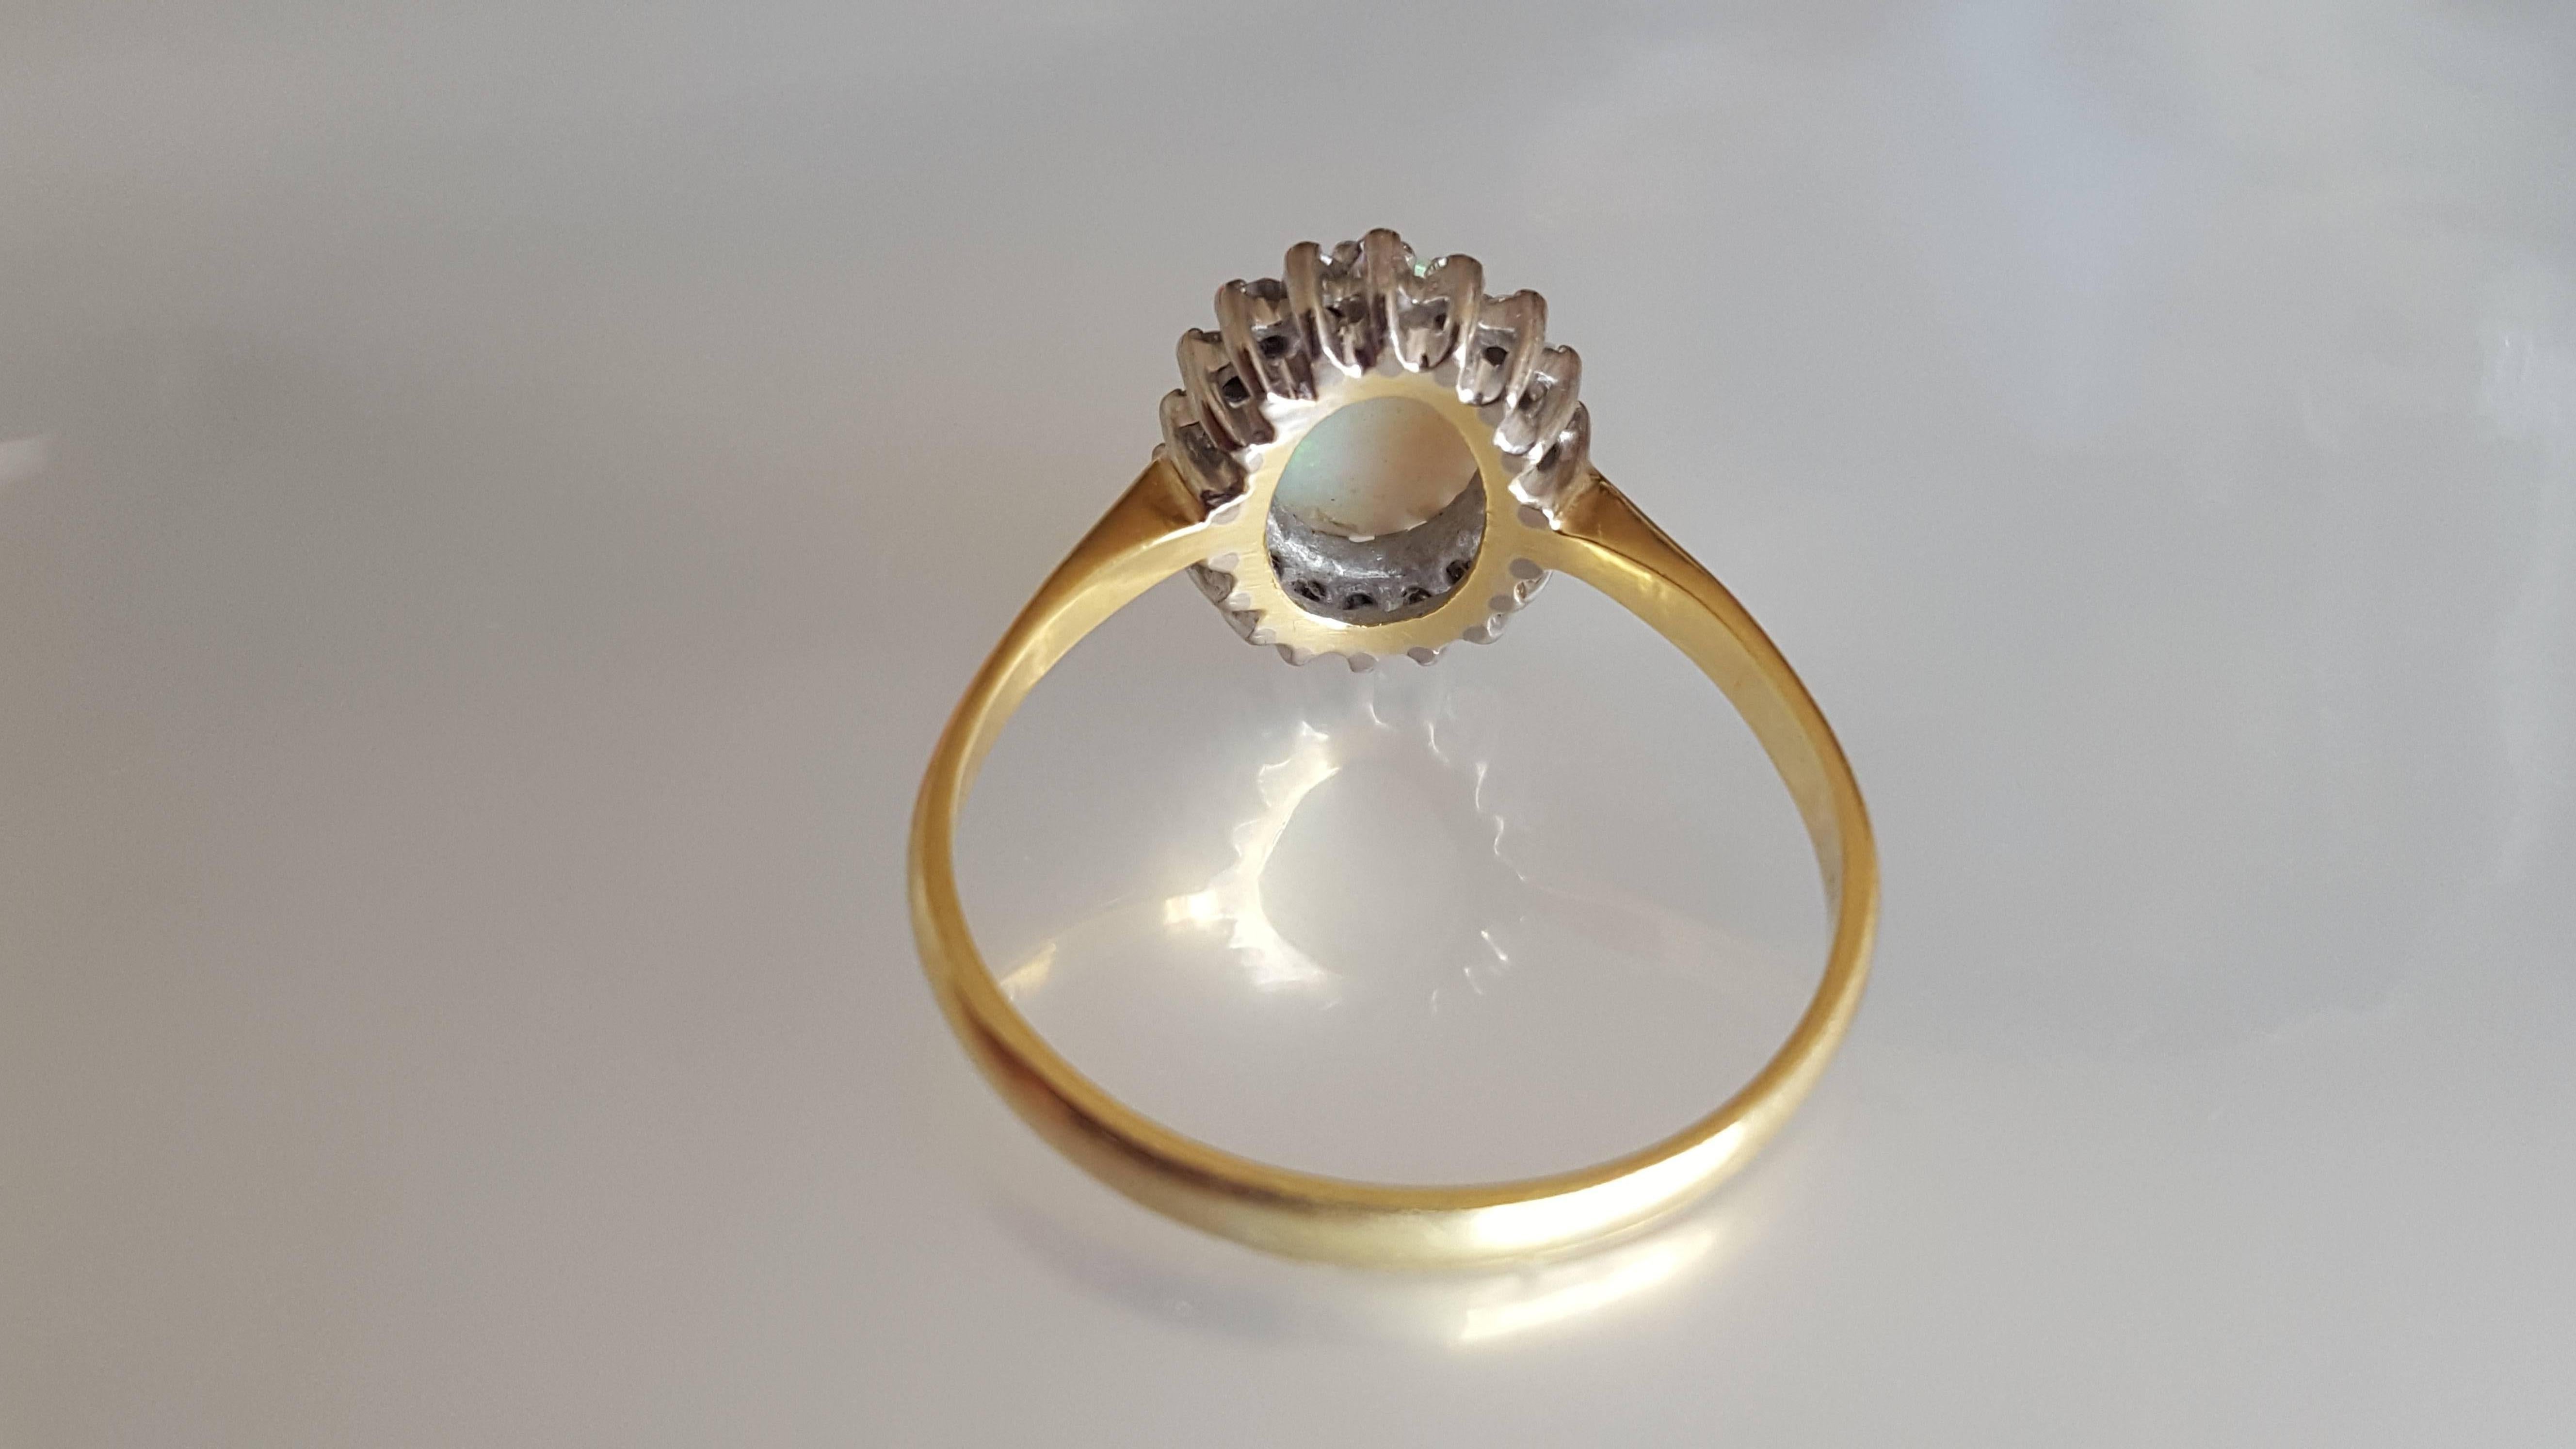 A Lovely Vintage c.1973 Australian Opal and Diamond halo cluster ring in 18 Carat white and yellow gold. English origin. 
Size T 1/2 UK, 10.25 US sizeable 
Height of the face 12mm
Opal 9mm x 7mm
Full London hallmark for 18 Carat Gold, dated